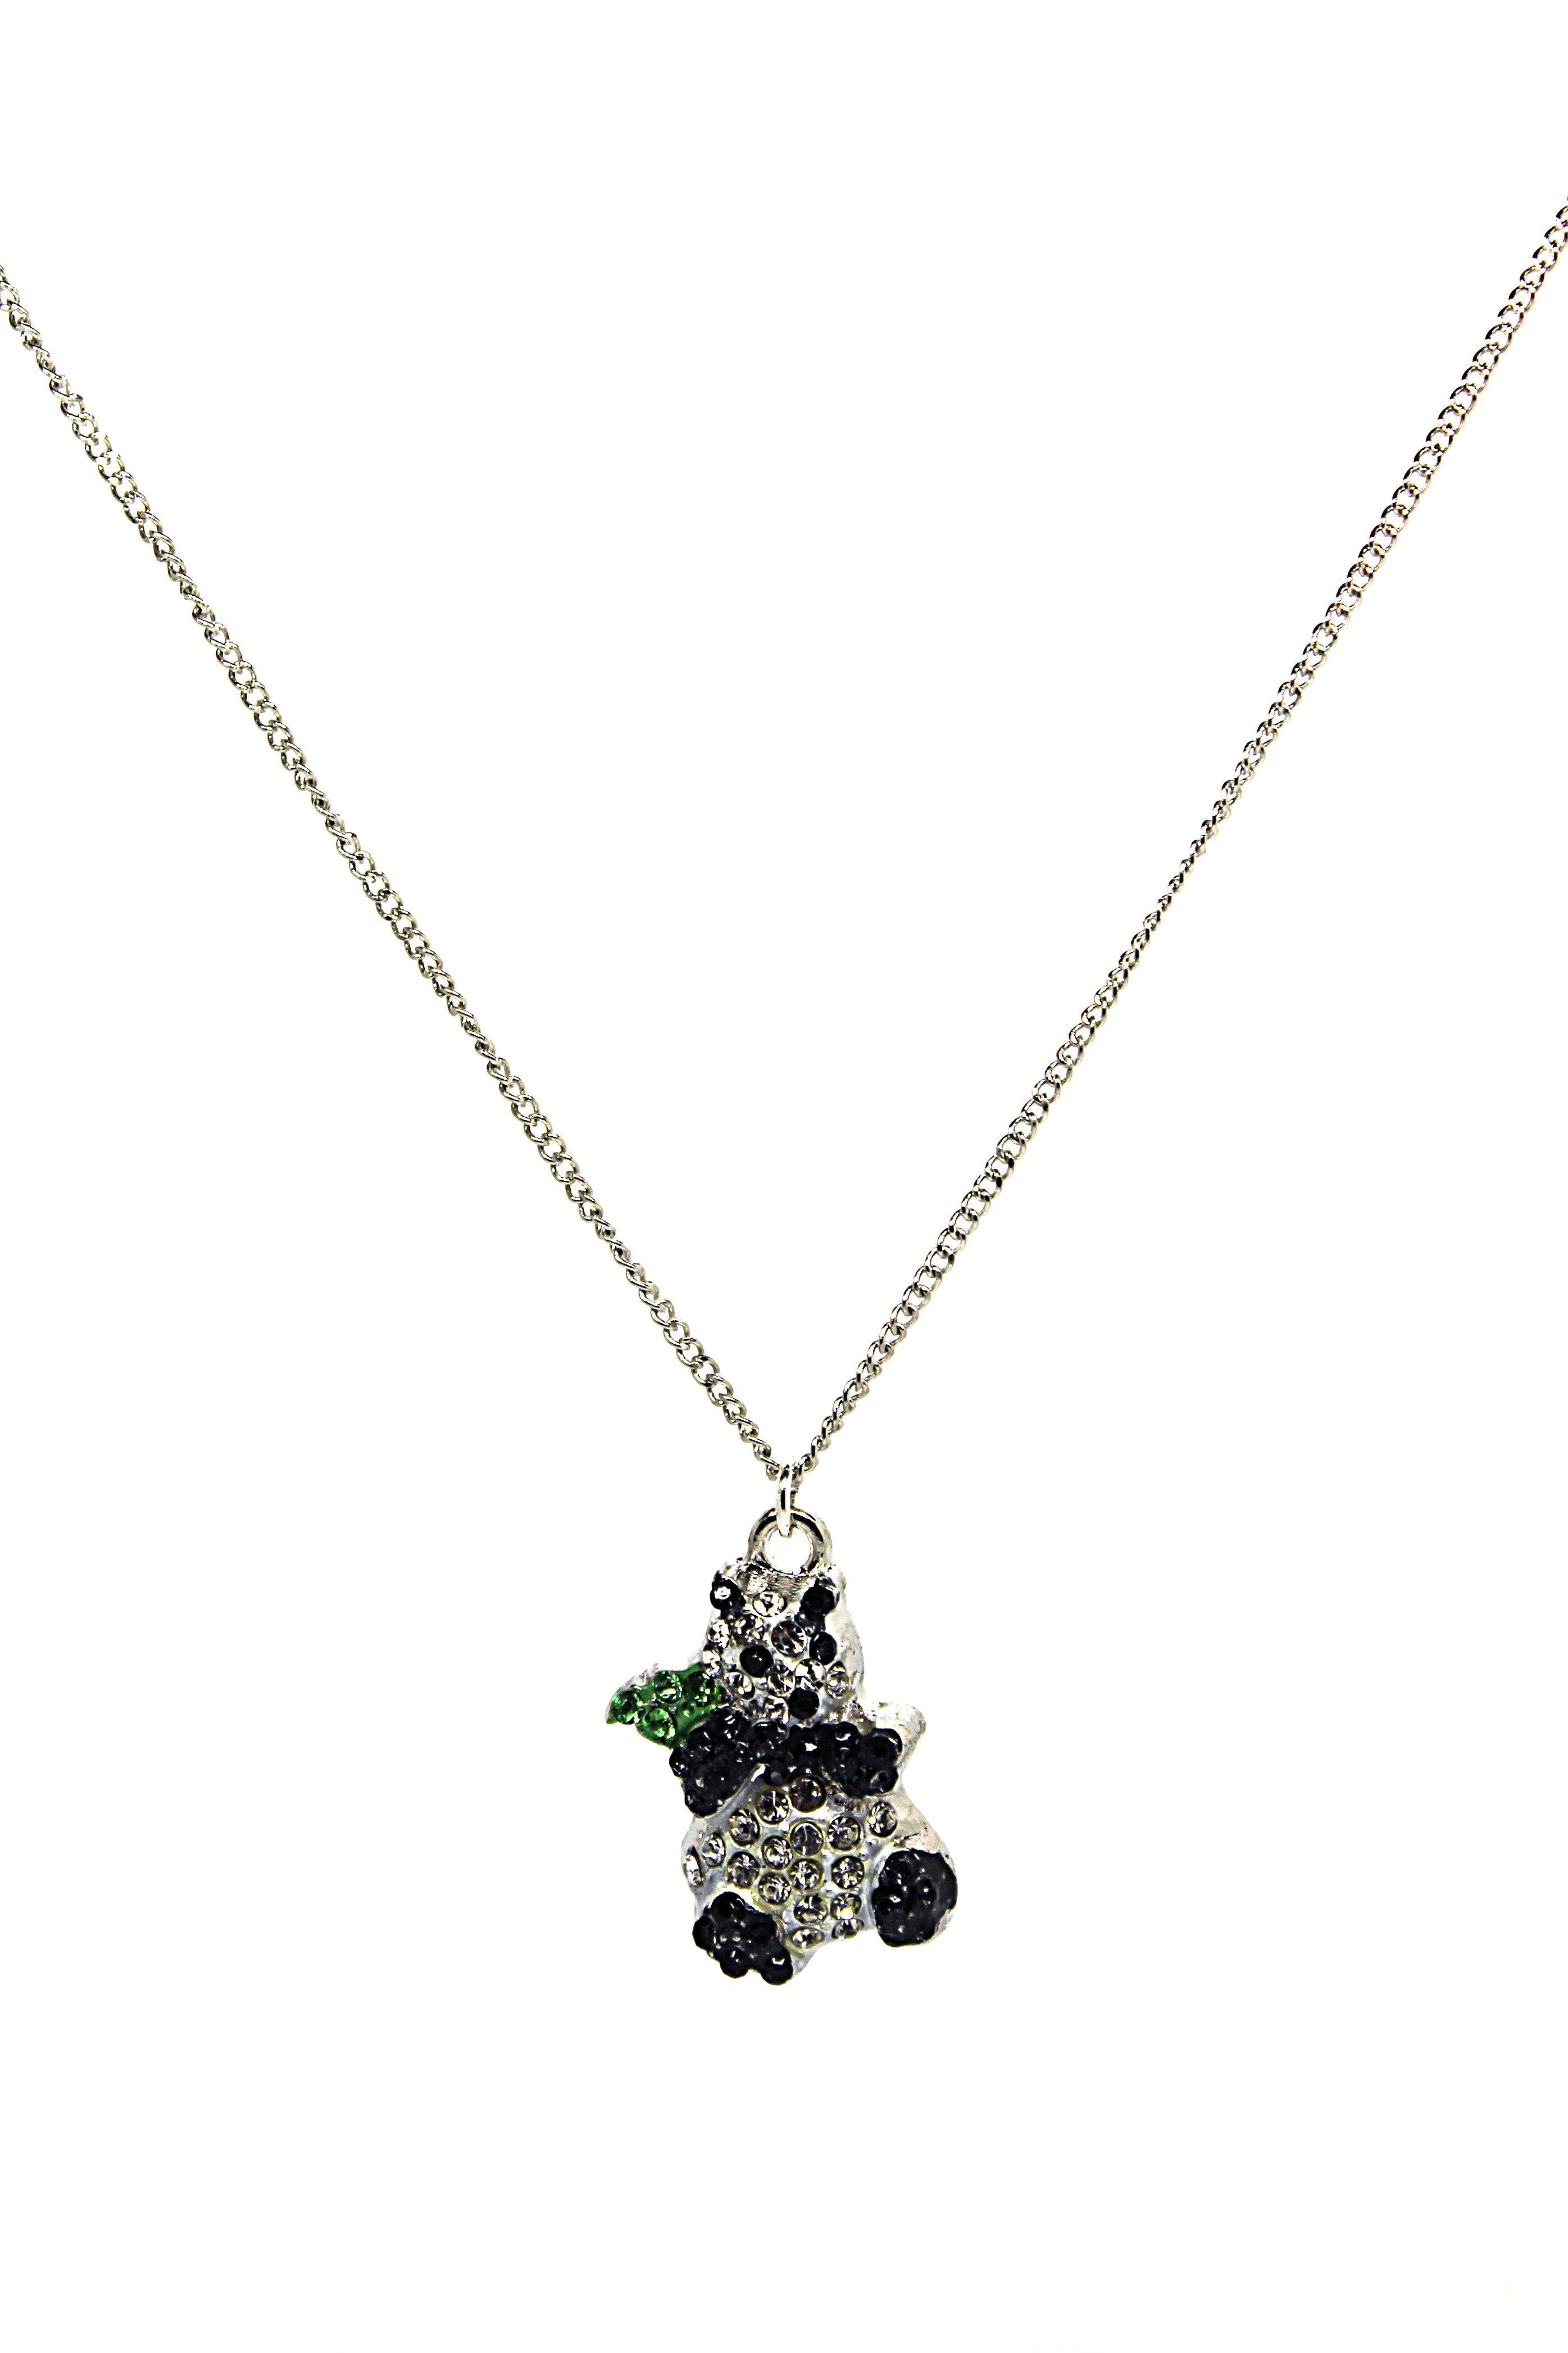 Panda Necklace - Wildtouch - Wildtouch